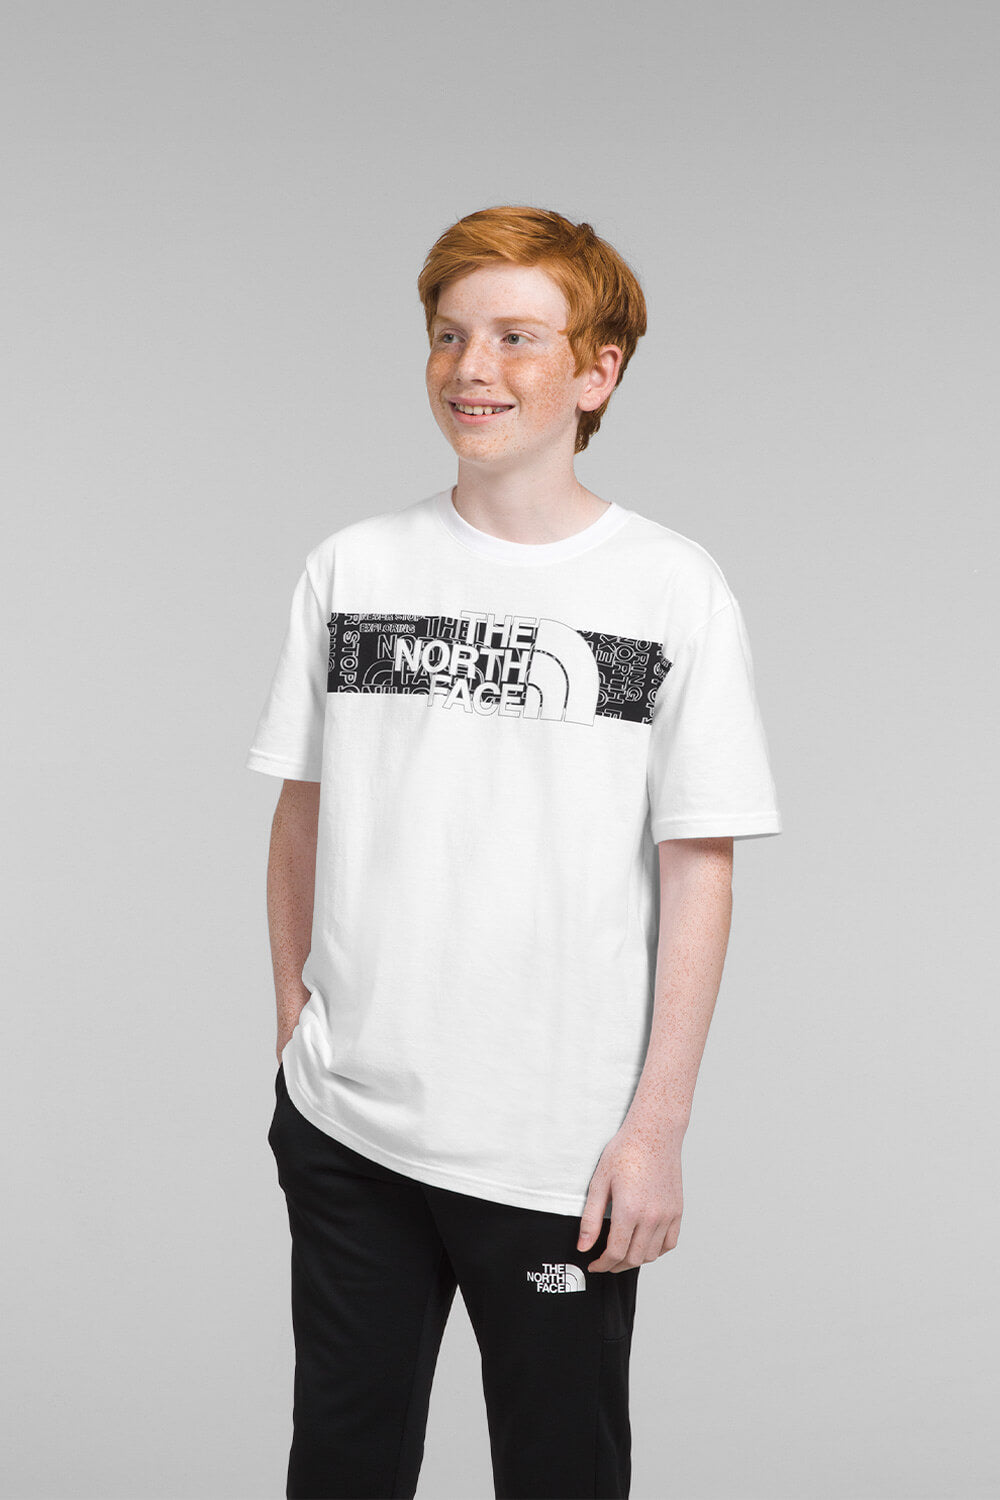 The North Face Youth Graphic T-Shirt for Boys in White | NF0A82T8-VY4 –  Glik's